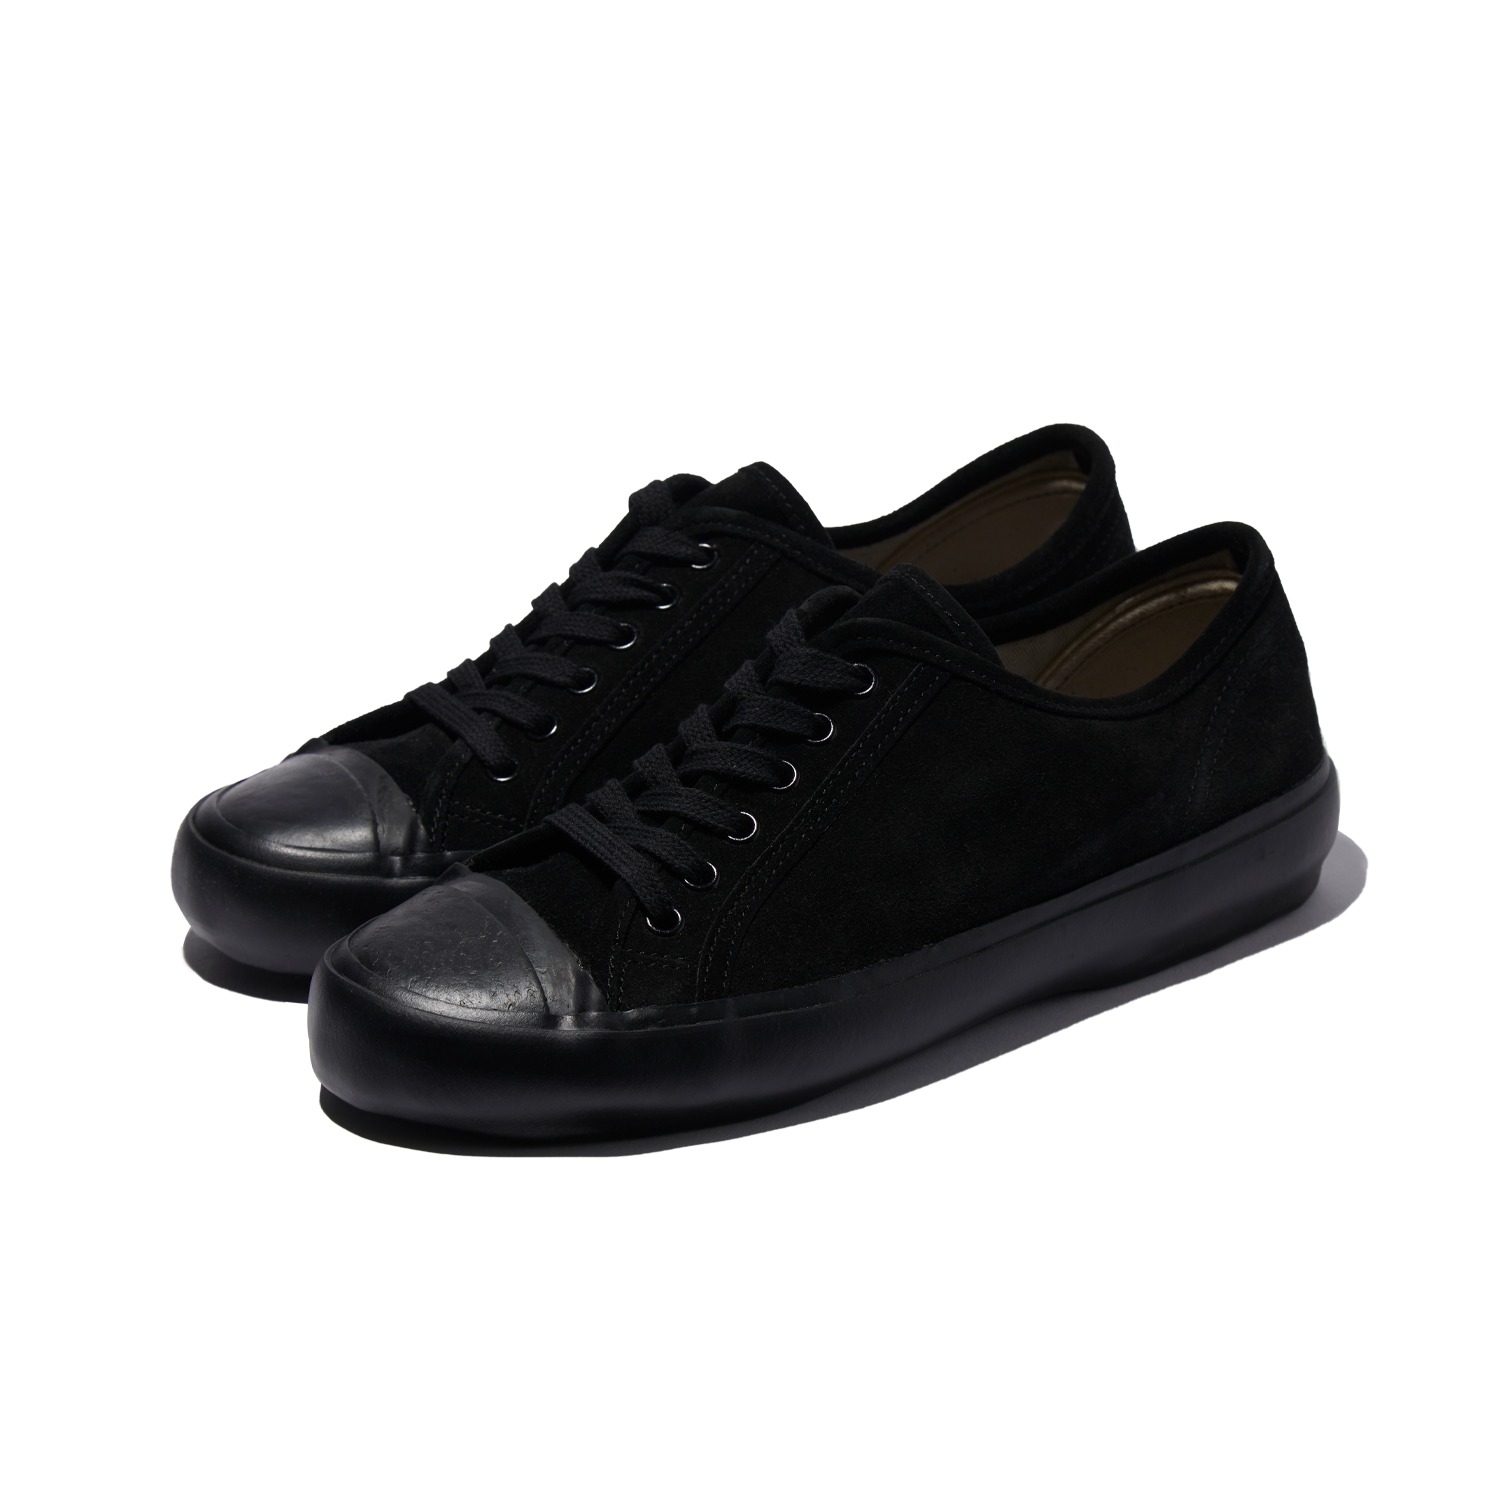 US NAVY MILITARY TRAINER (BLACK SUEDE)